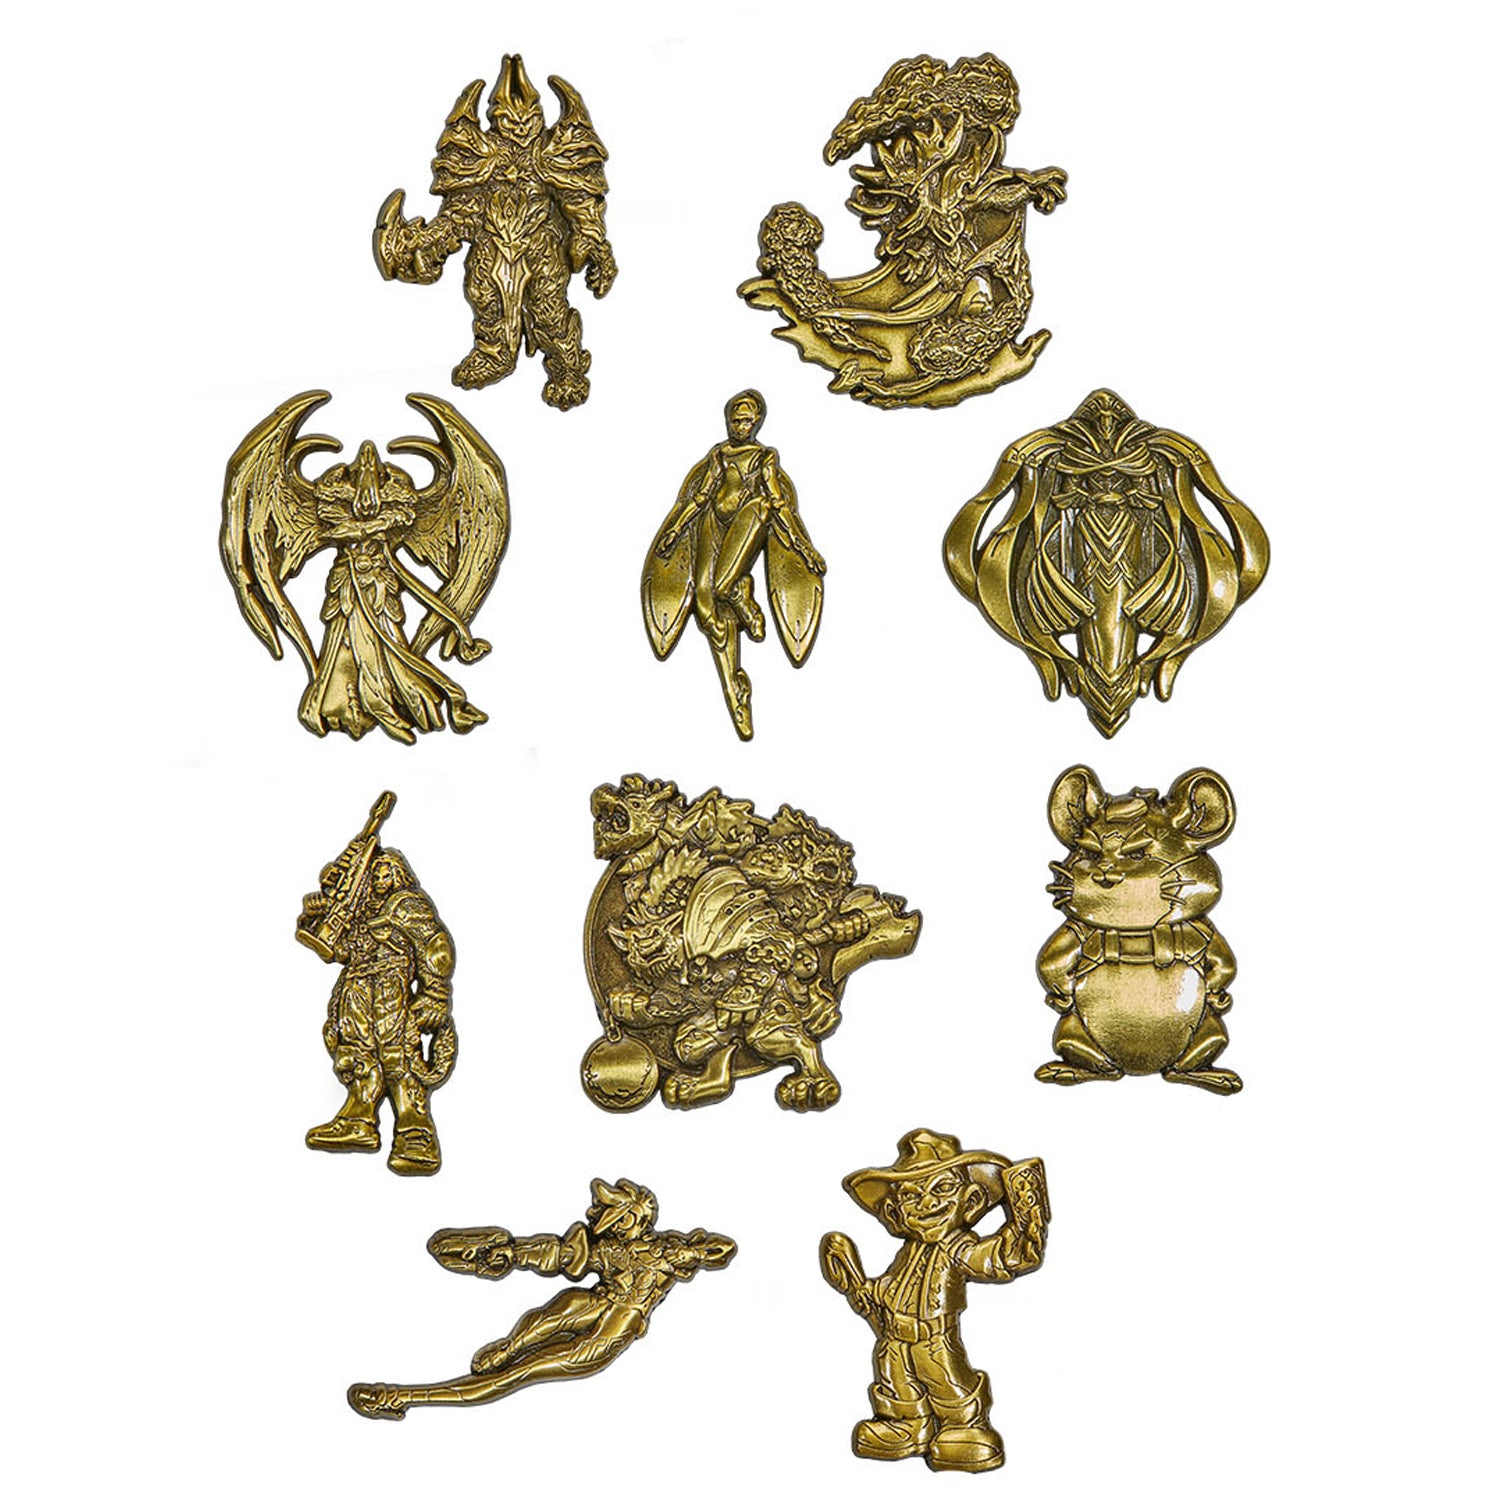 Rare gold versions of the Blizzard Series 8 Blind Pack 5-Piece Pin Set